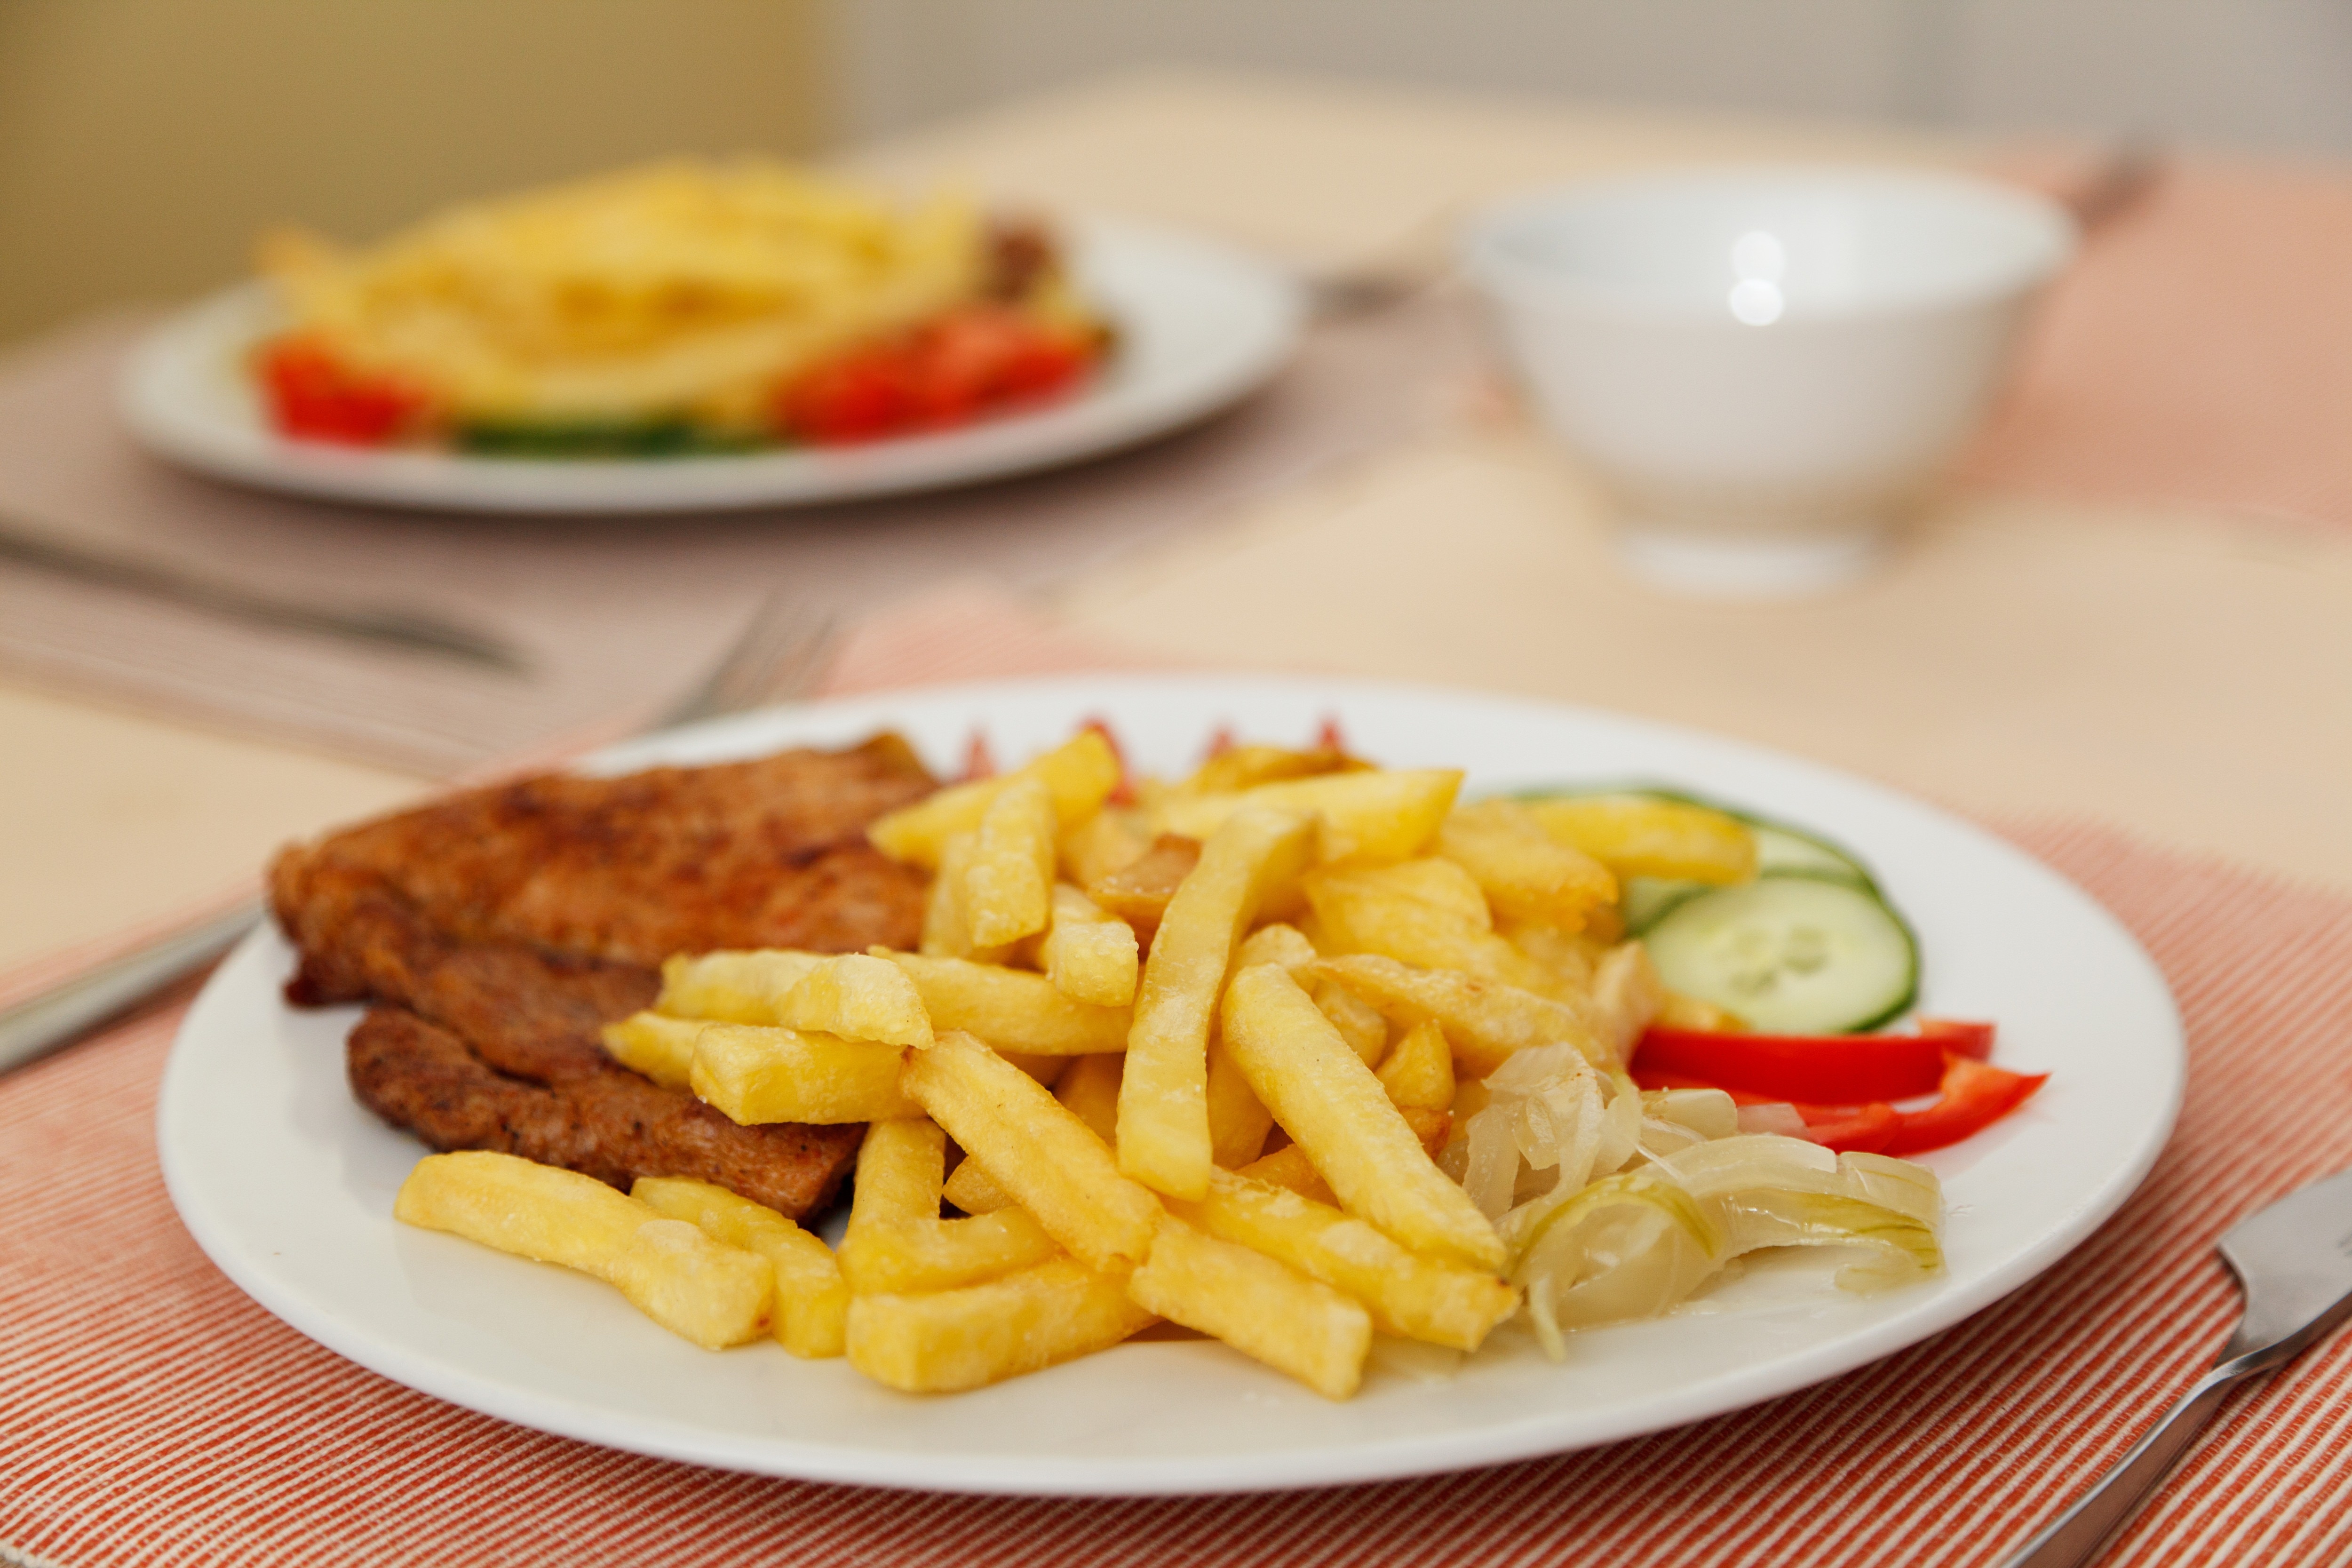 french fries and steak dish